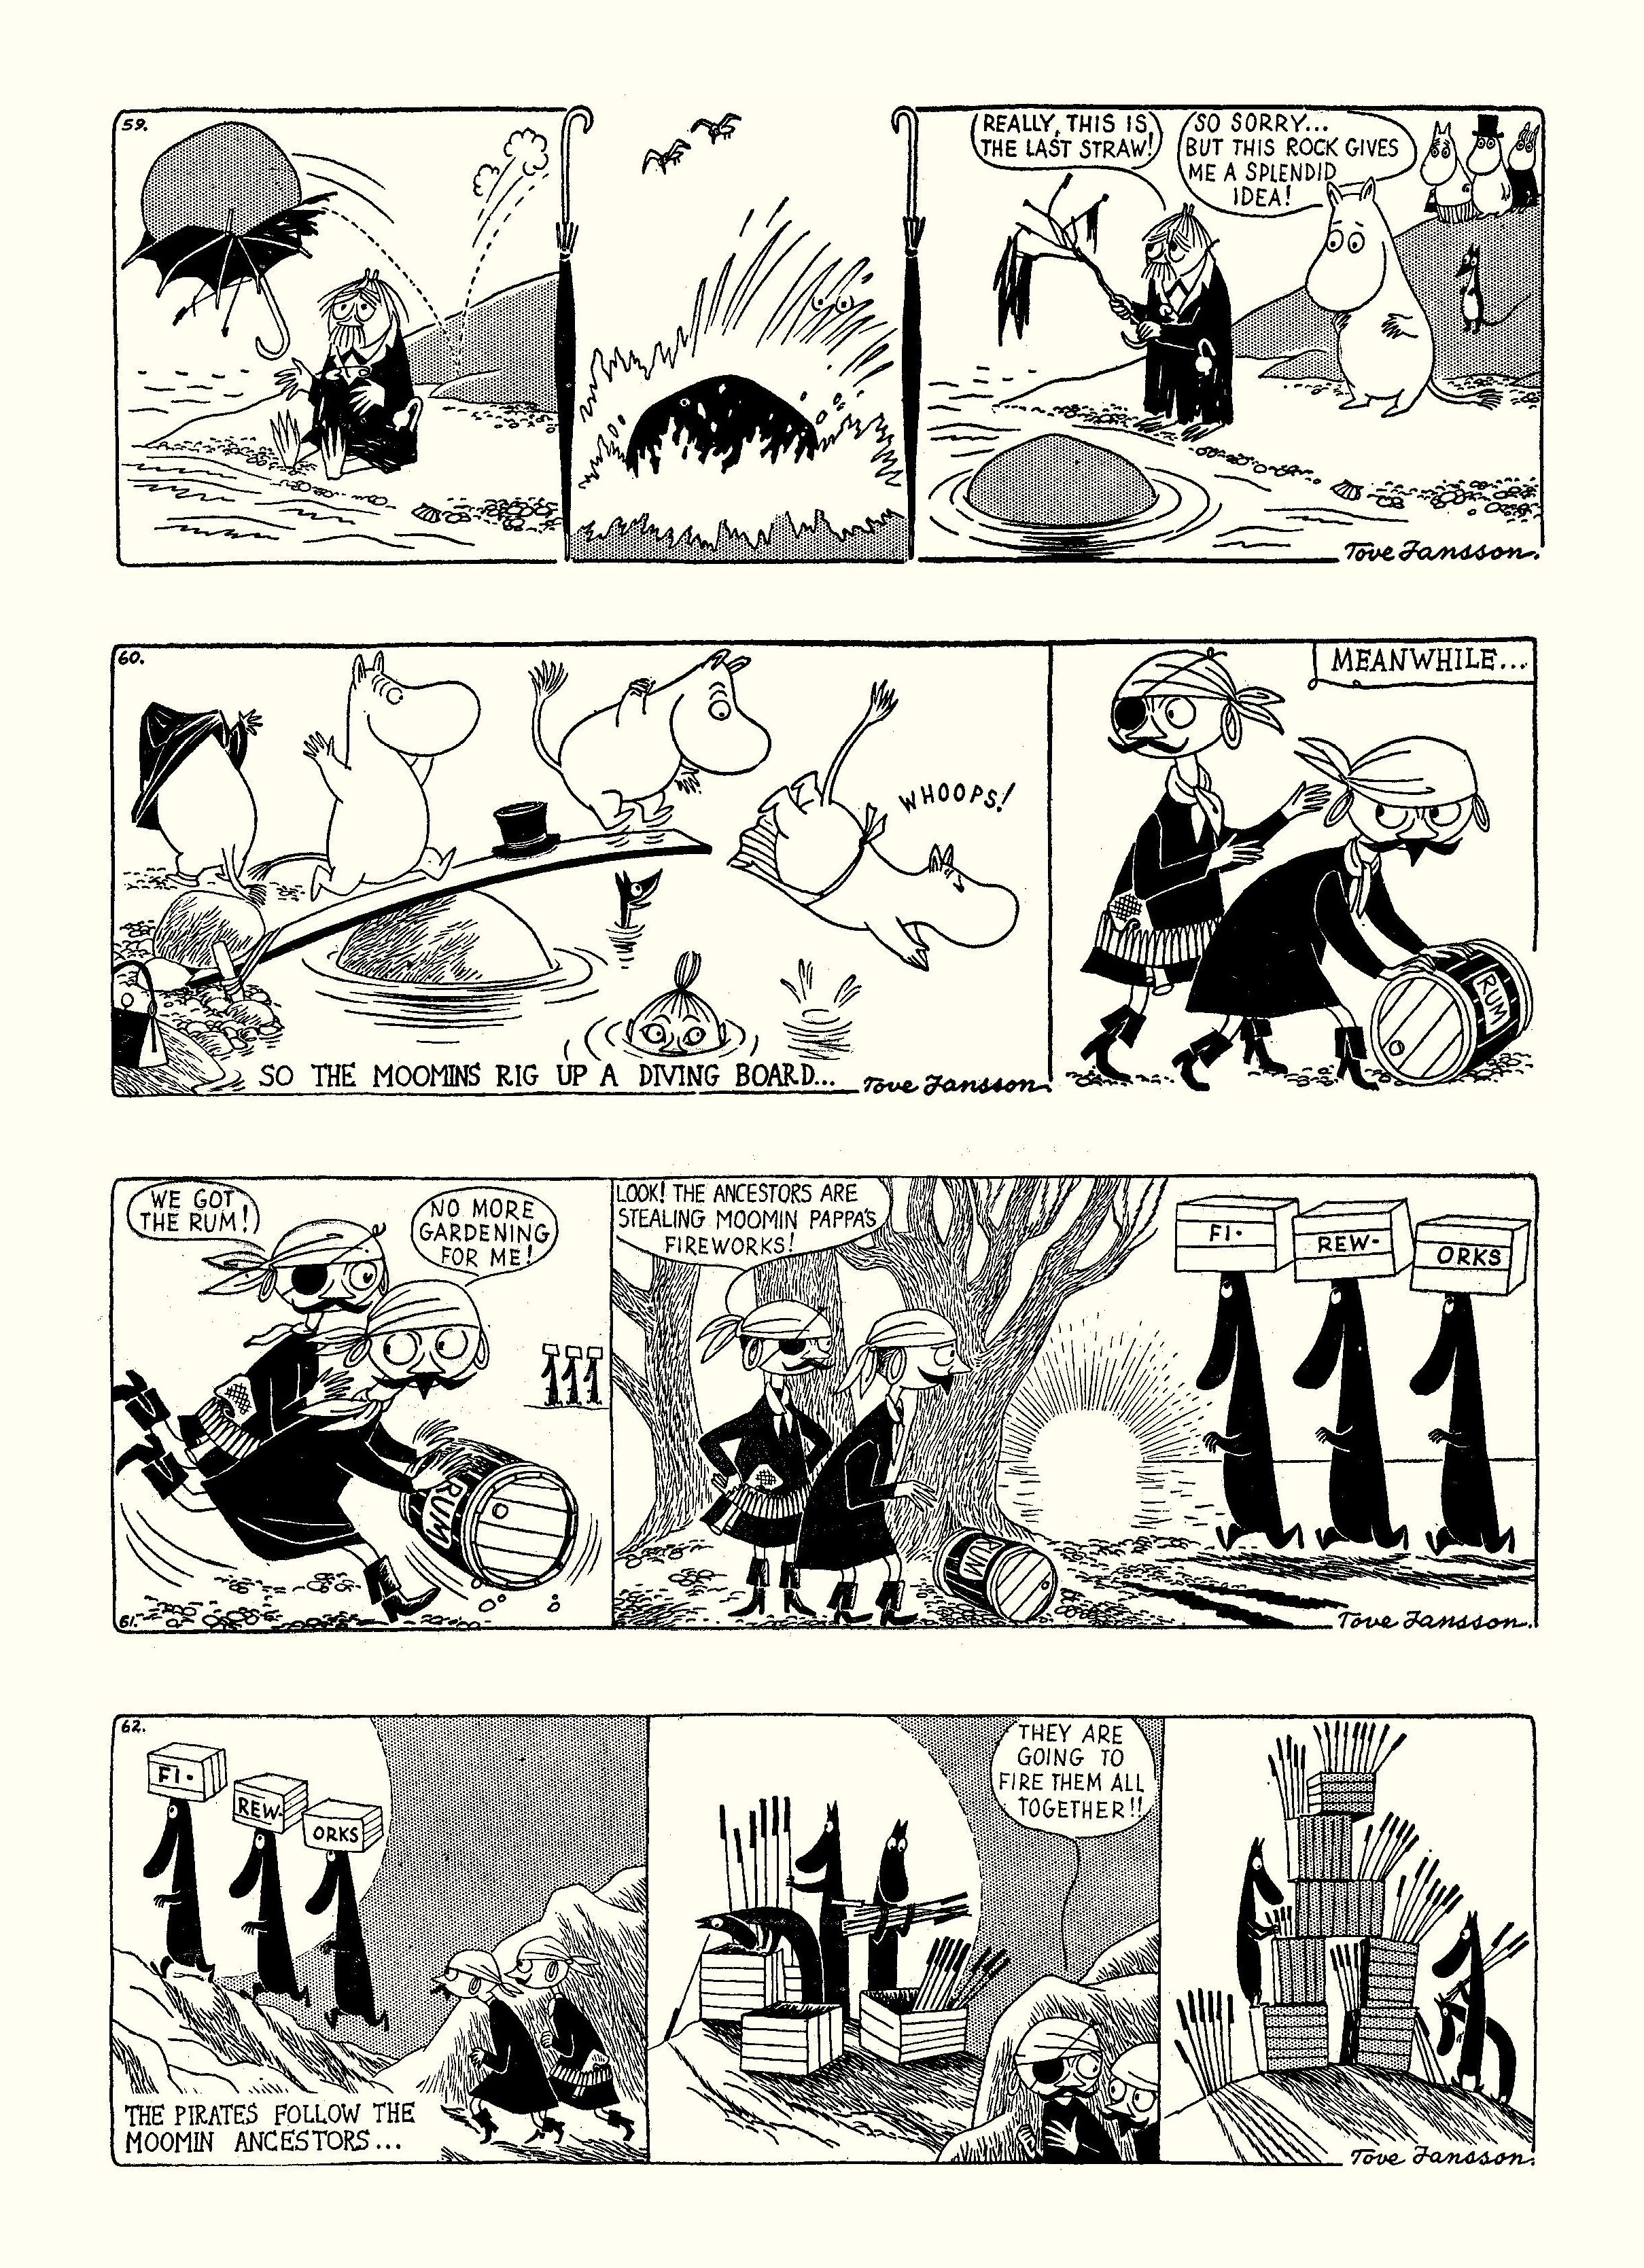 Read online Moomin: The Complete Tove Jansson Comic Strip comic -  Issue # TPB 1 - 85